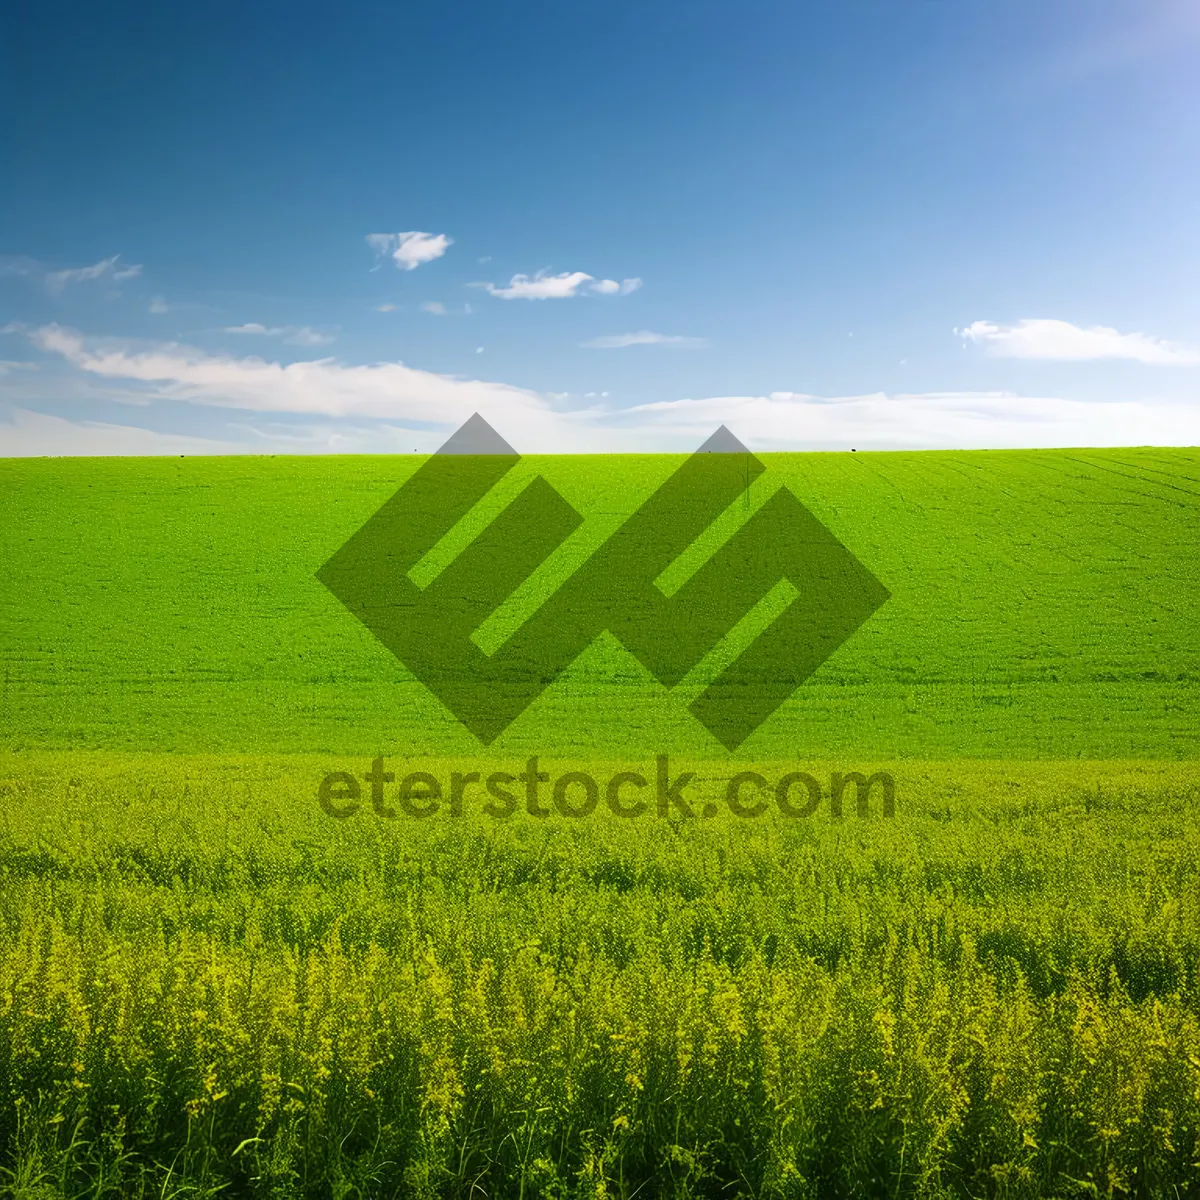 Picture of Golden Wheat Fields Stretching into the Horizon